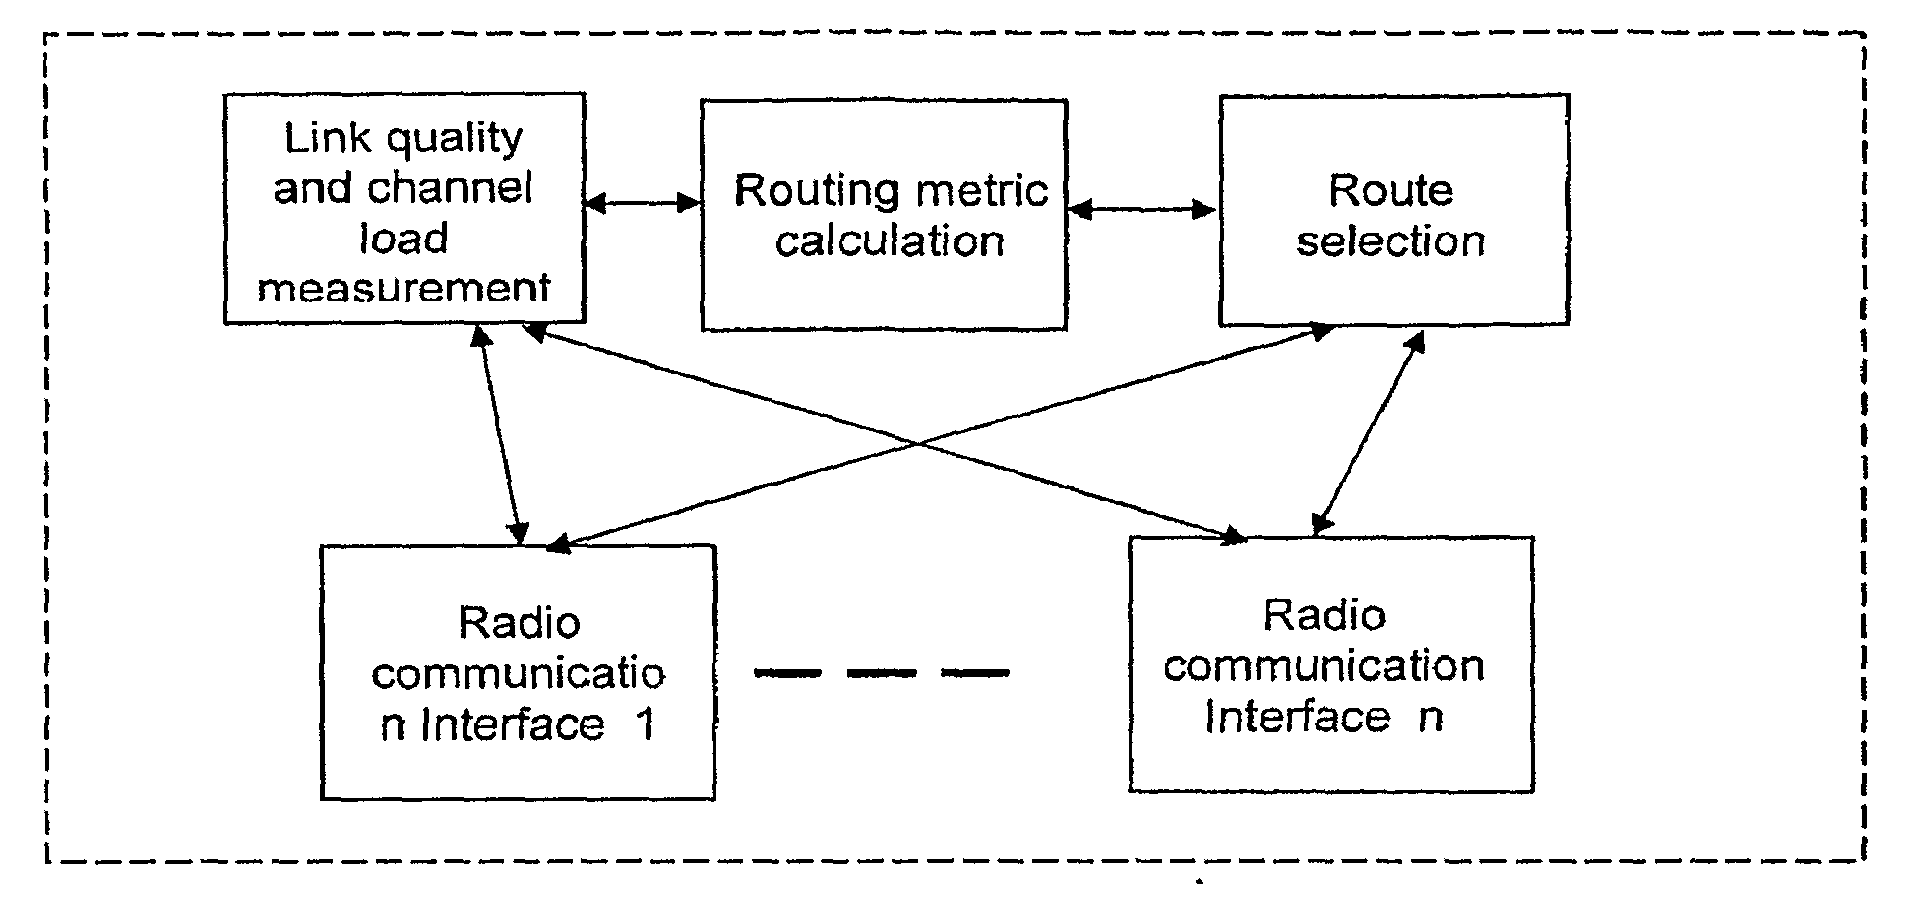 Radio and bandwidth aware routing metric for multi-radio multi-channel mutli-hop wireless networks